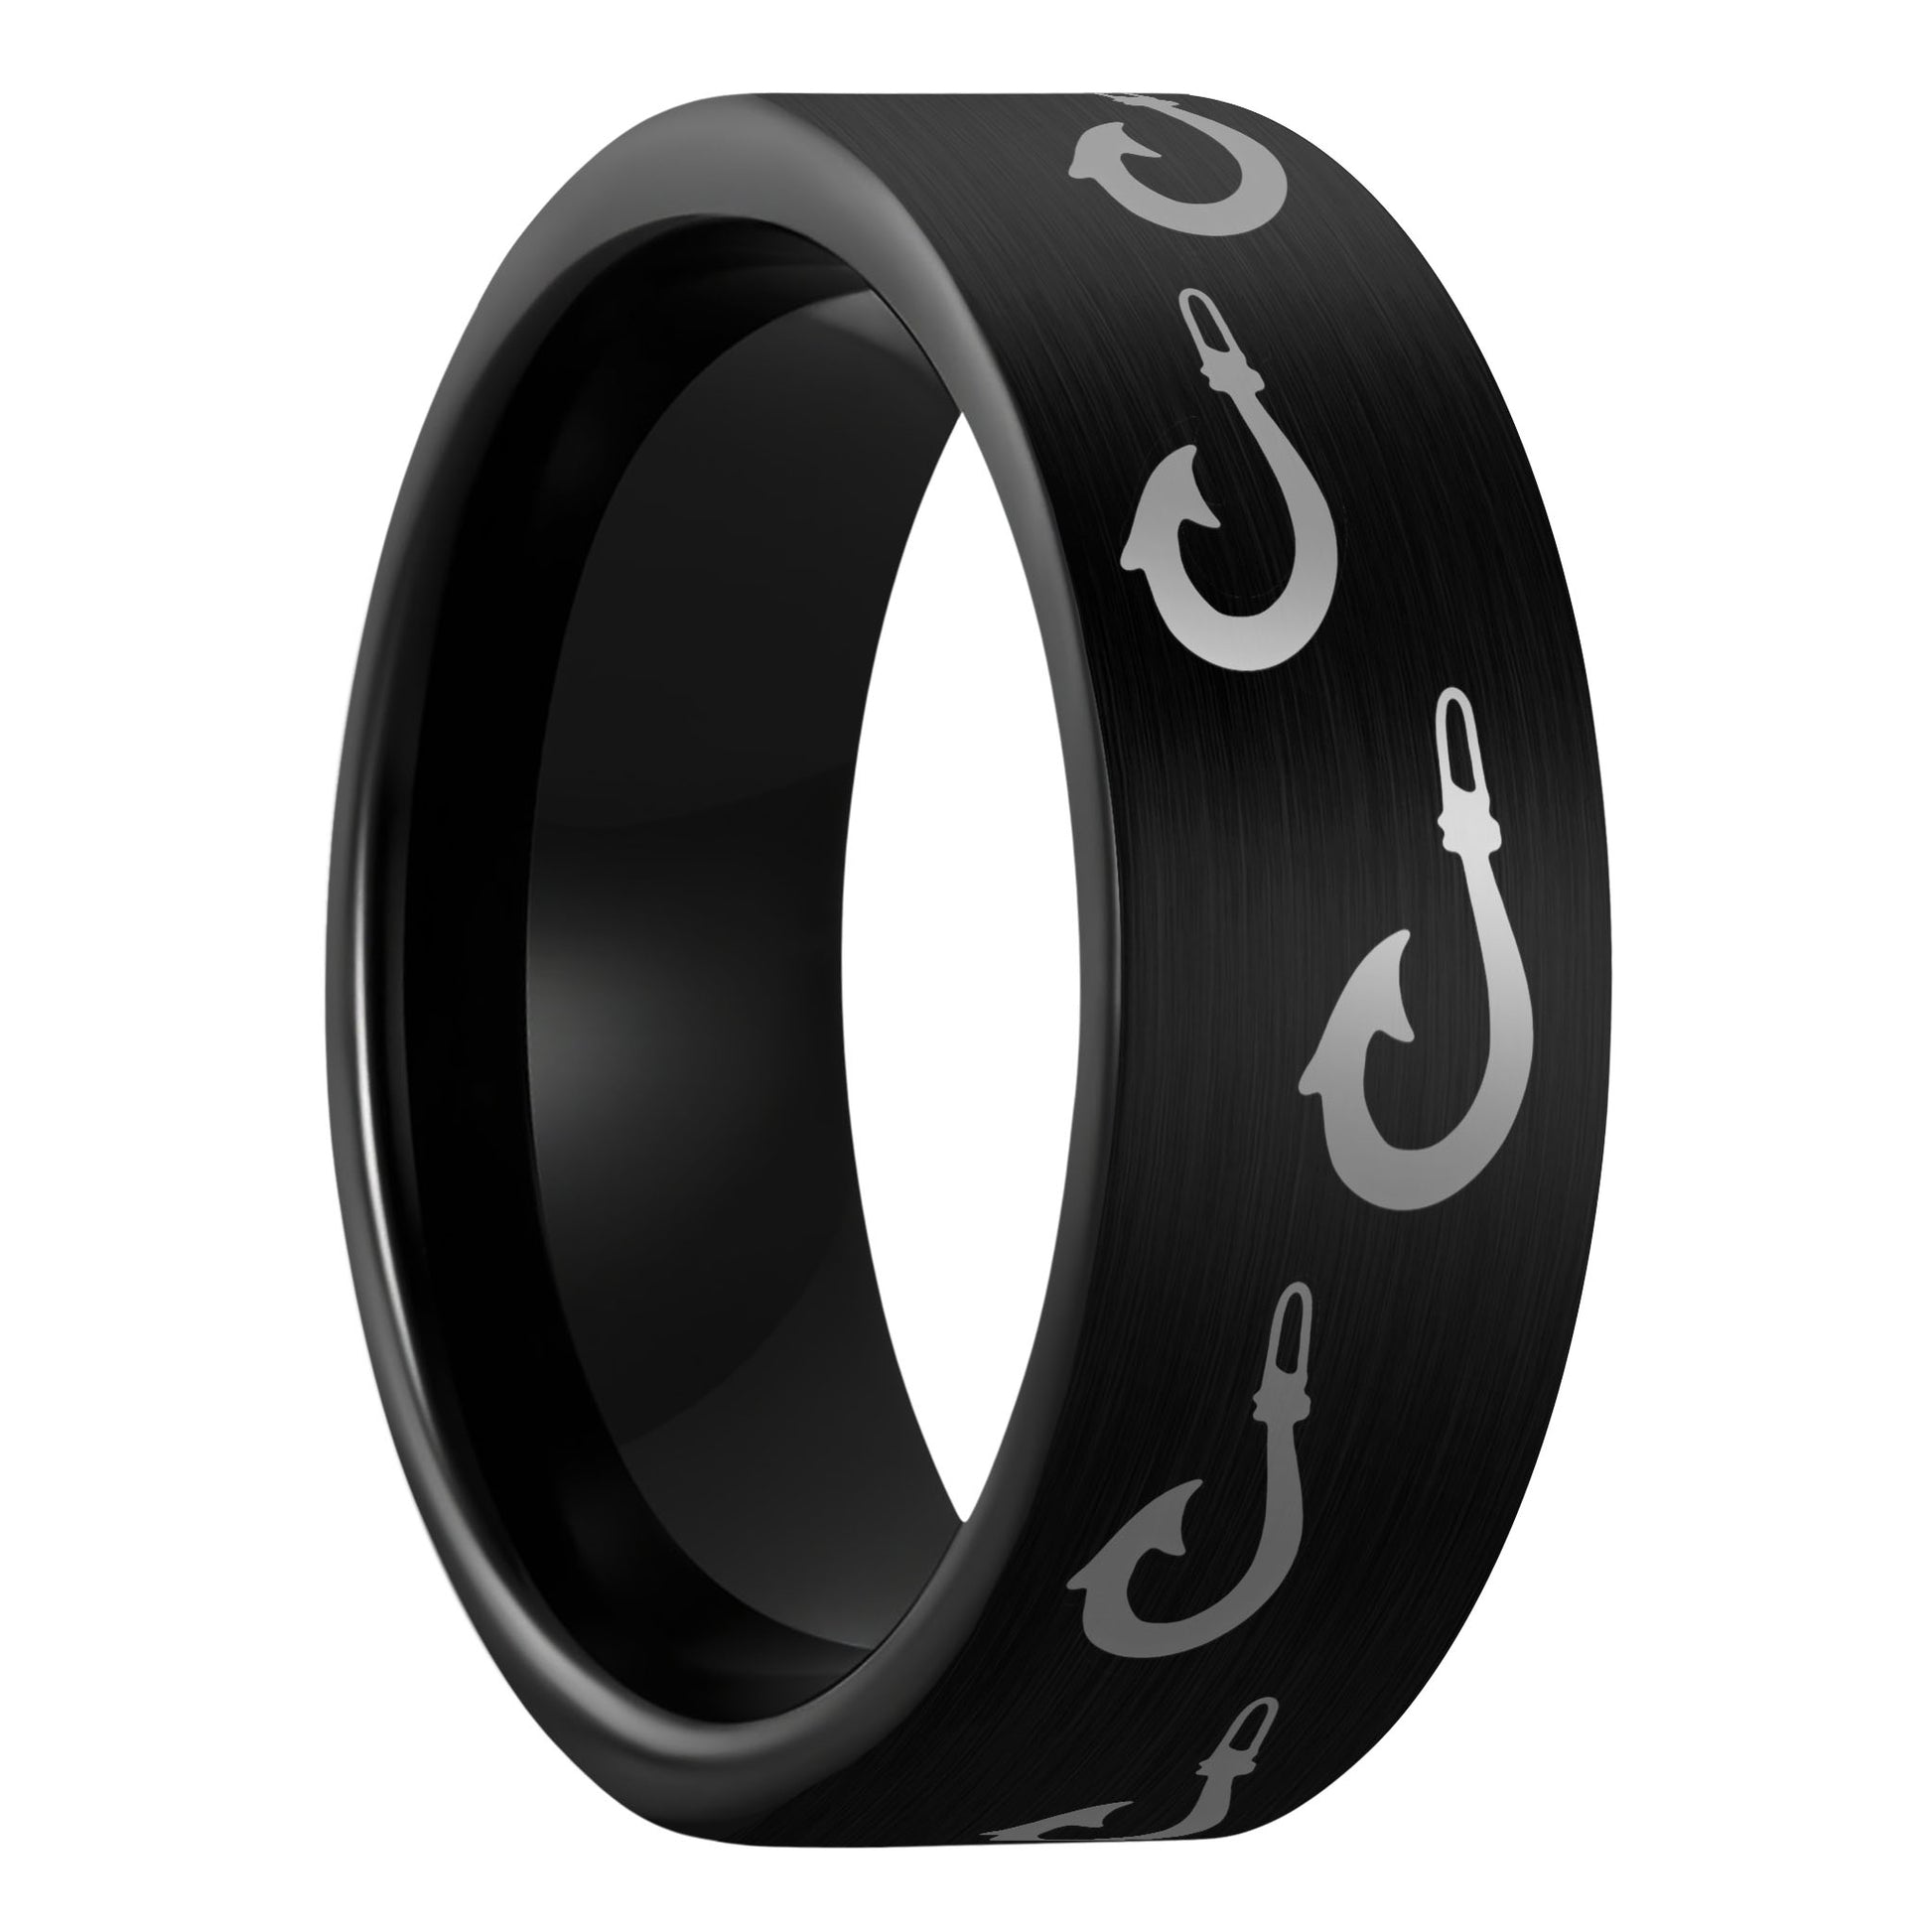 A polynesian fishing hook brushed black tungsten men's wedding band displayed on a plain white background.